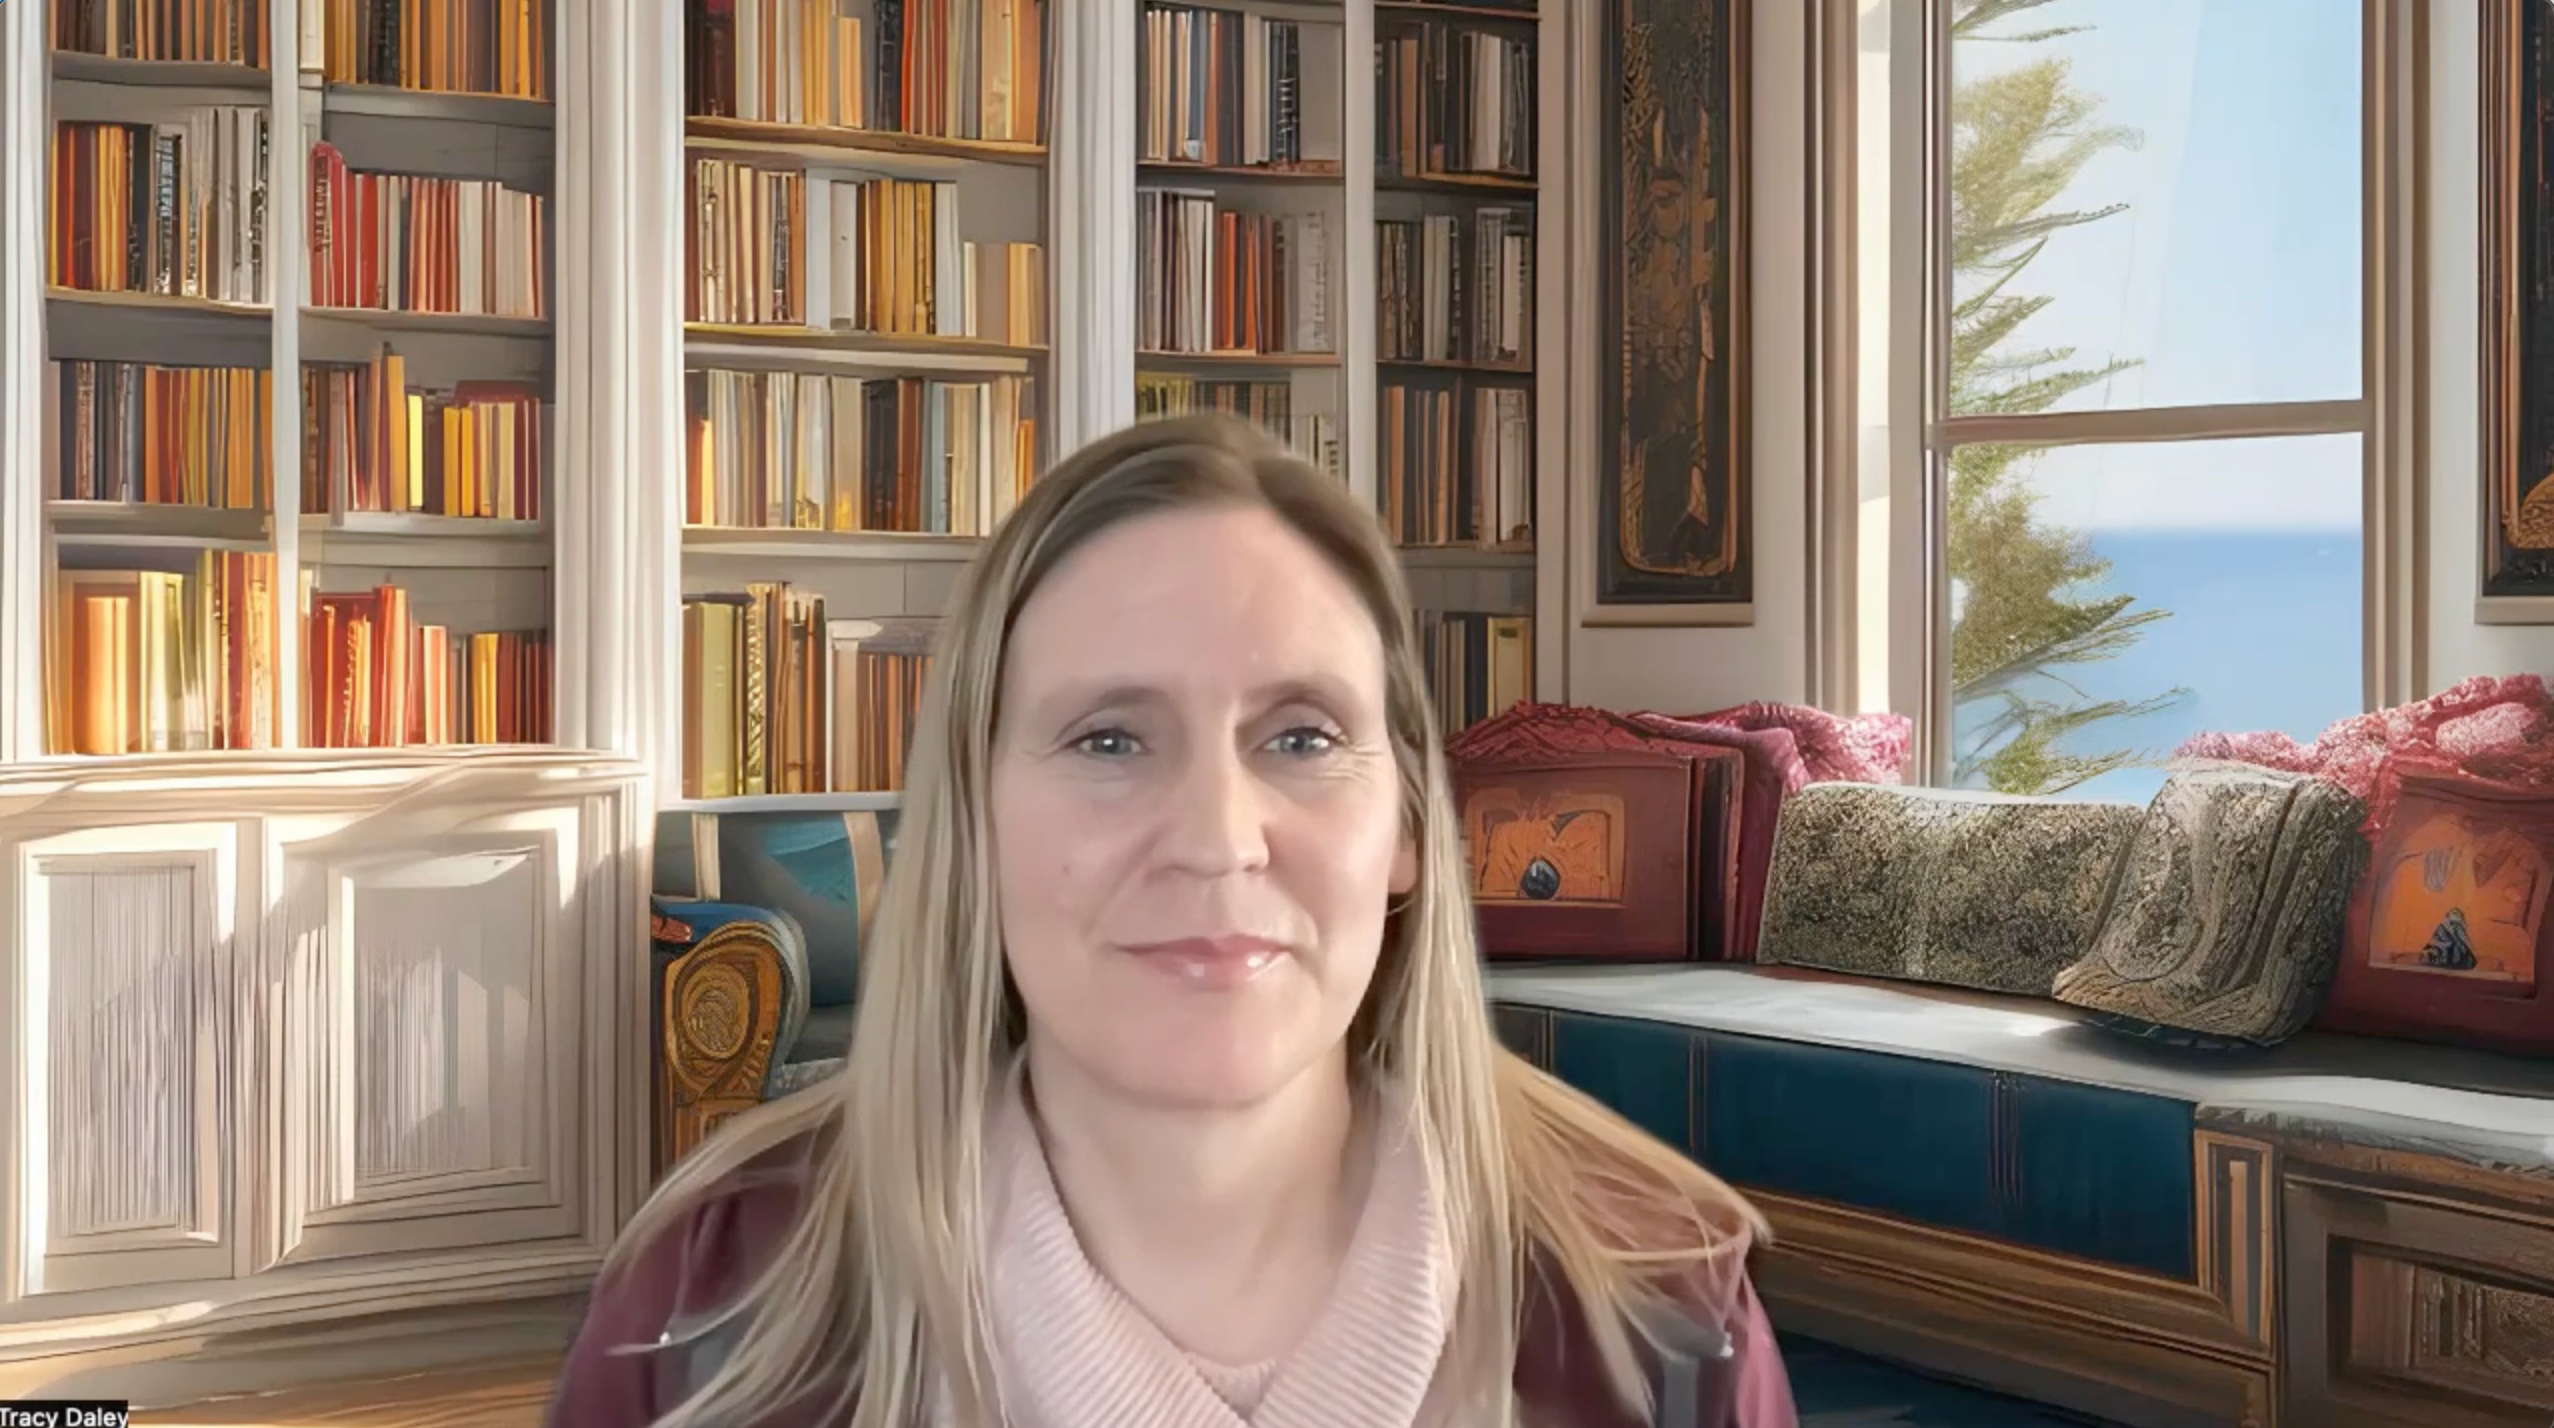 Load video: This video talks about the three goals of Night Nook Publishing and welcomes you to discover new books, and encourages self-care.